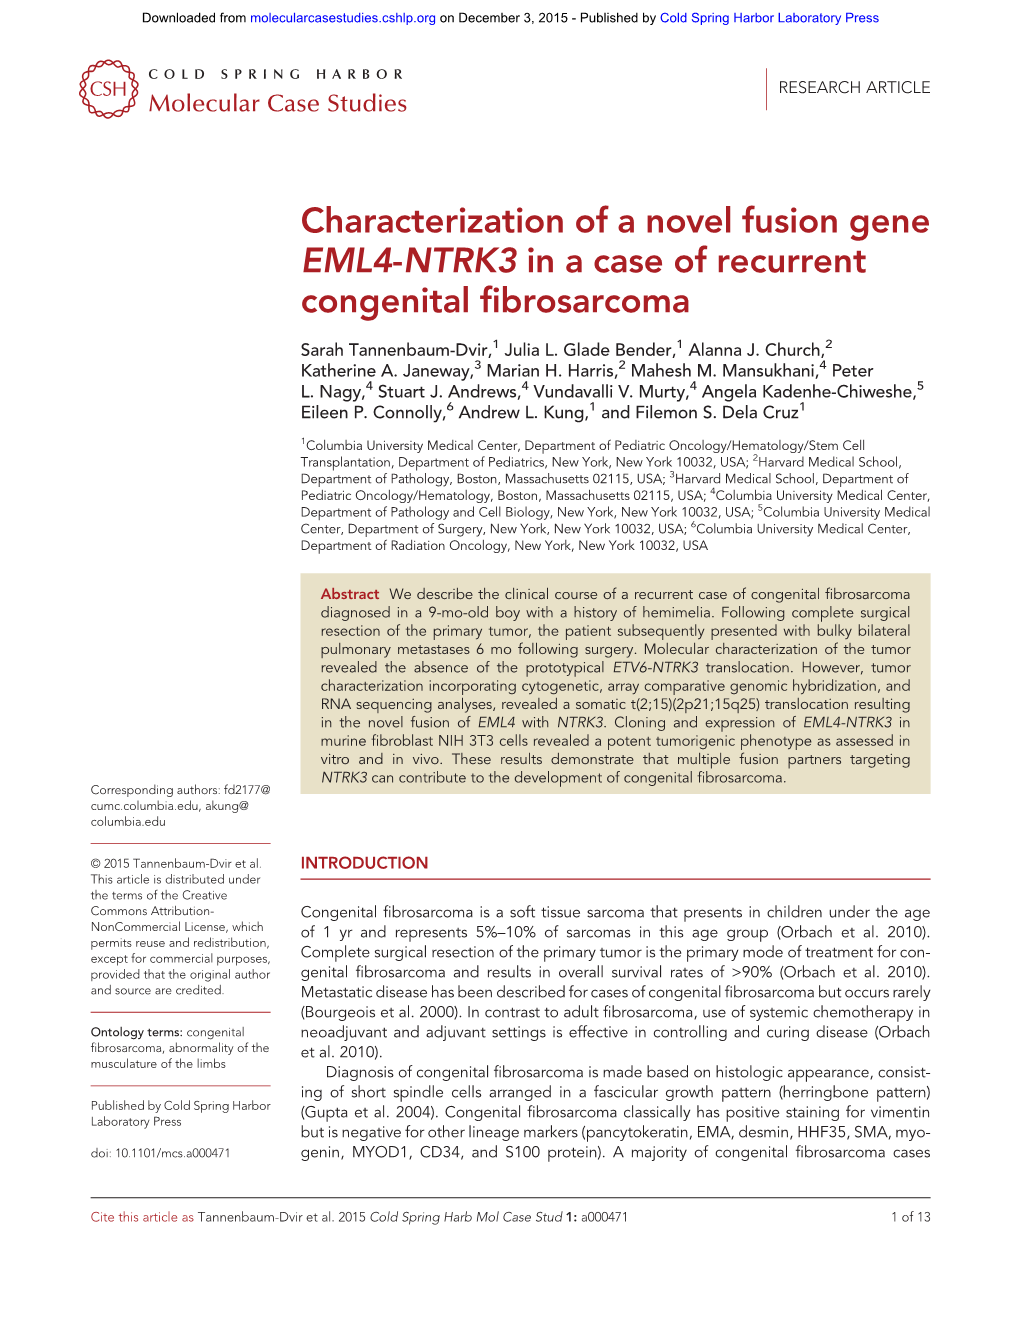 Characterization of a Novel Fusion Gene EML4-NTRK3 in a Case of Recurrent Congenital Fibrosarcoma